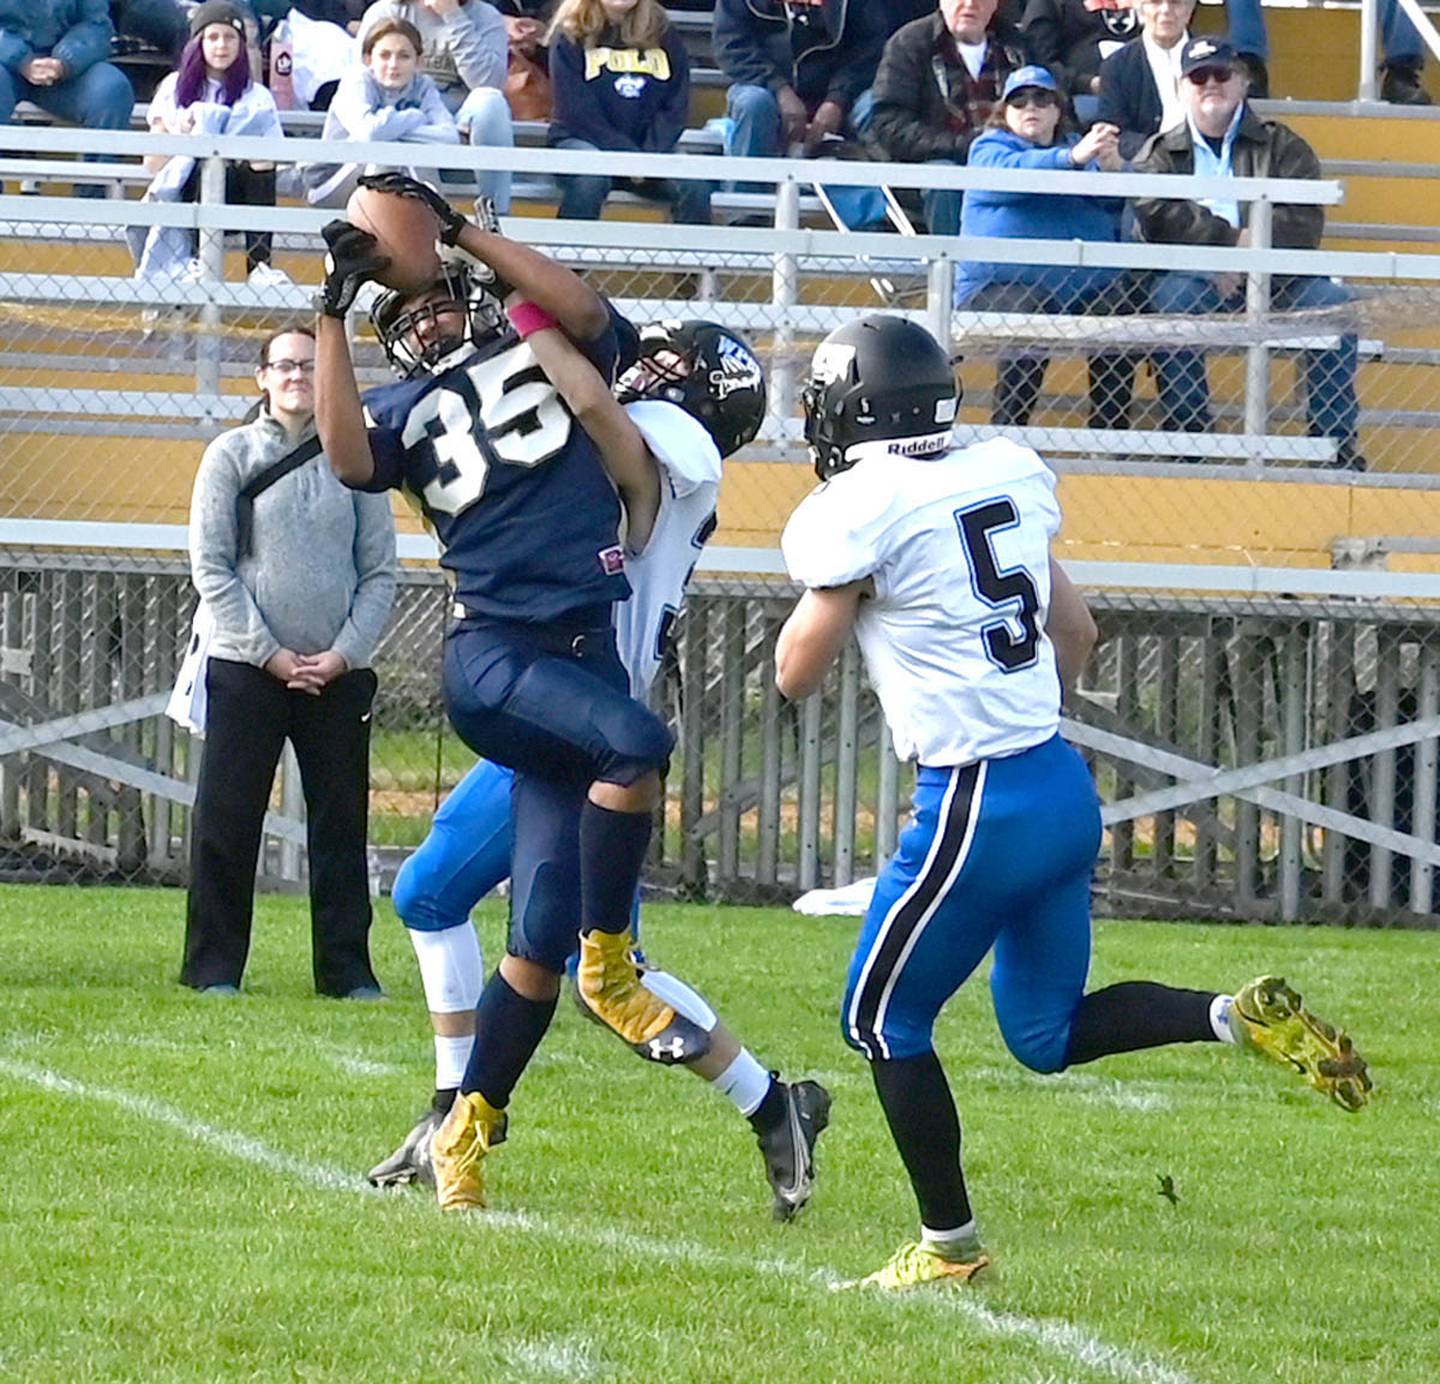 Polo's Kahil Sankey secures a pass on the far sideline during the first quarter against West Prairie Saturday.